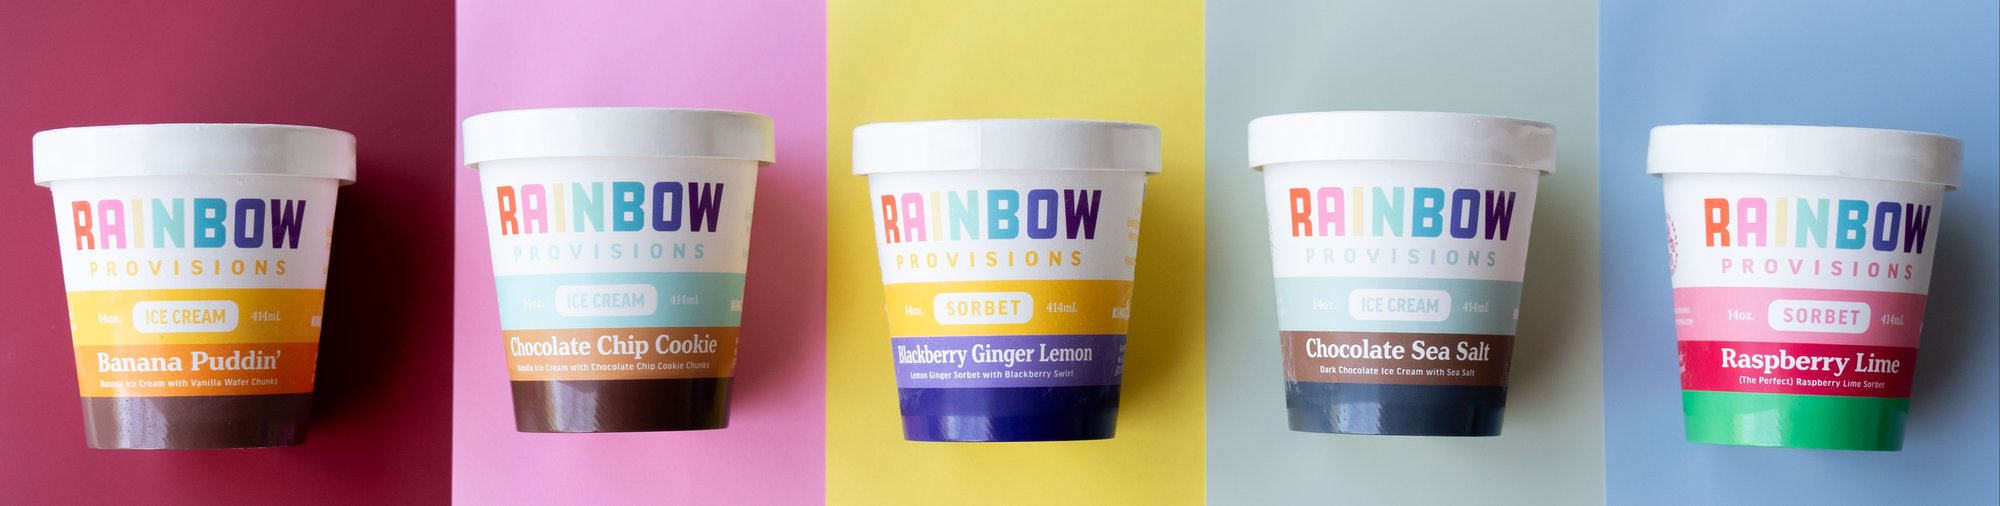 8-August_Rainbow_Provisions_All Flavors_6185